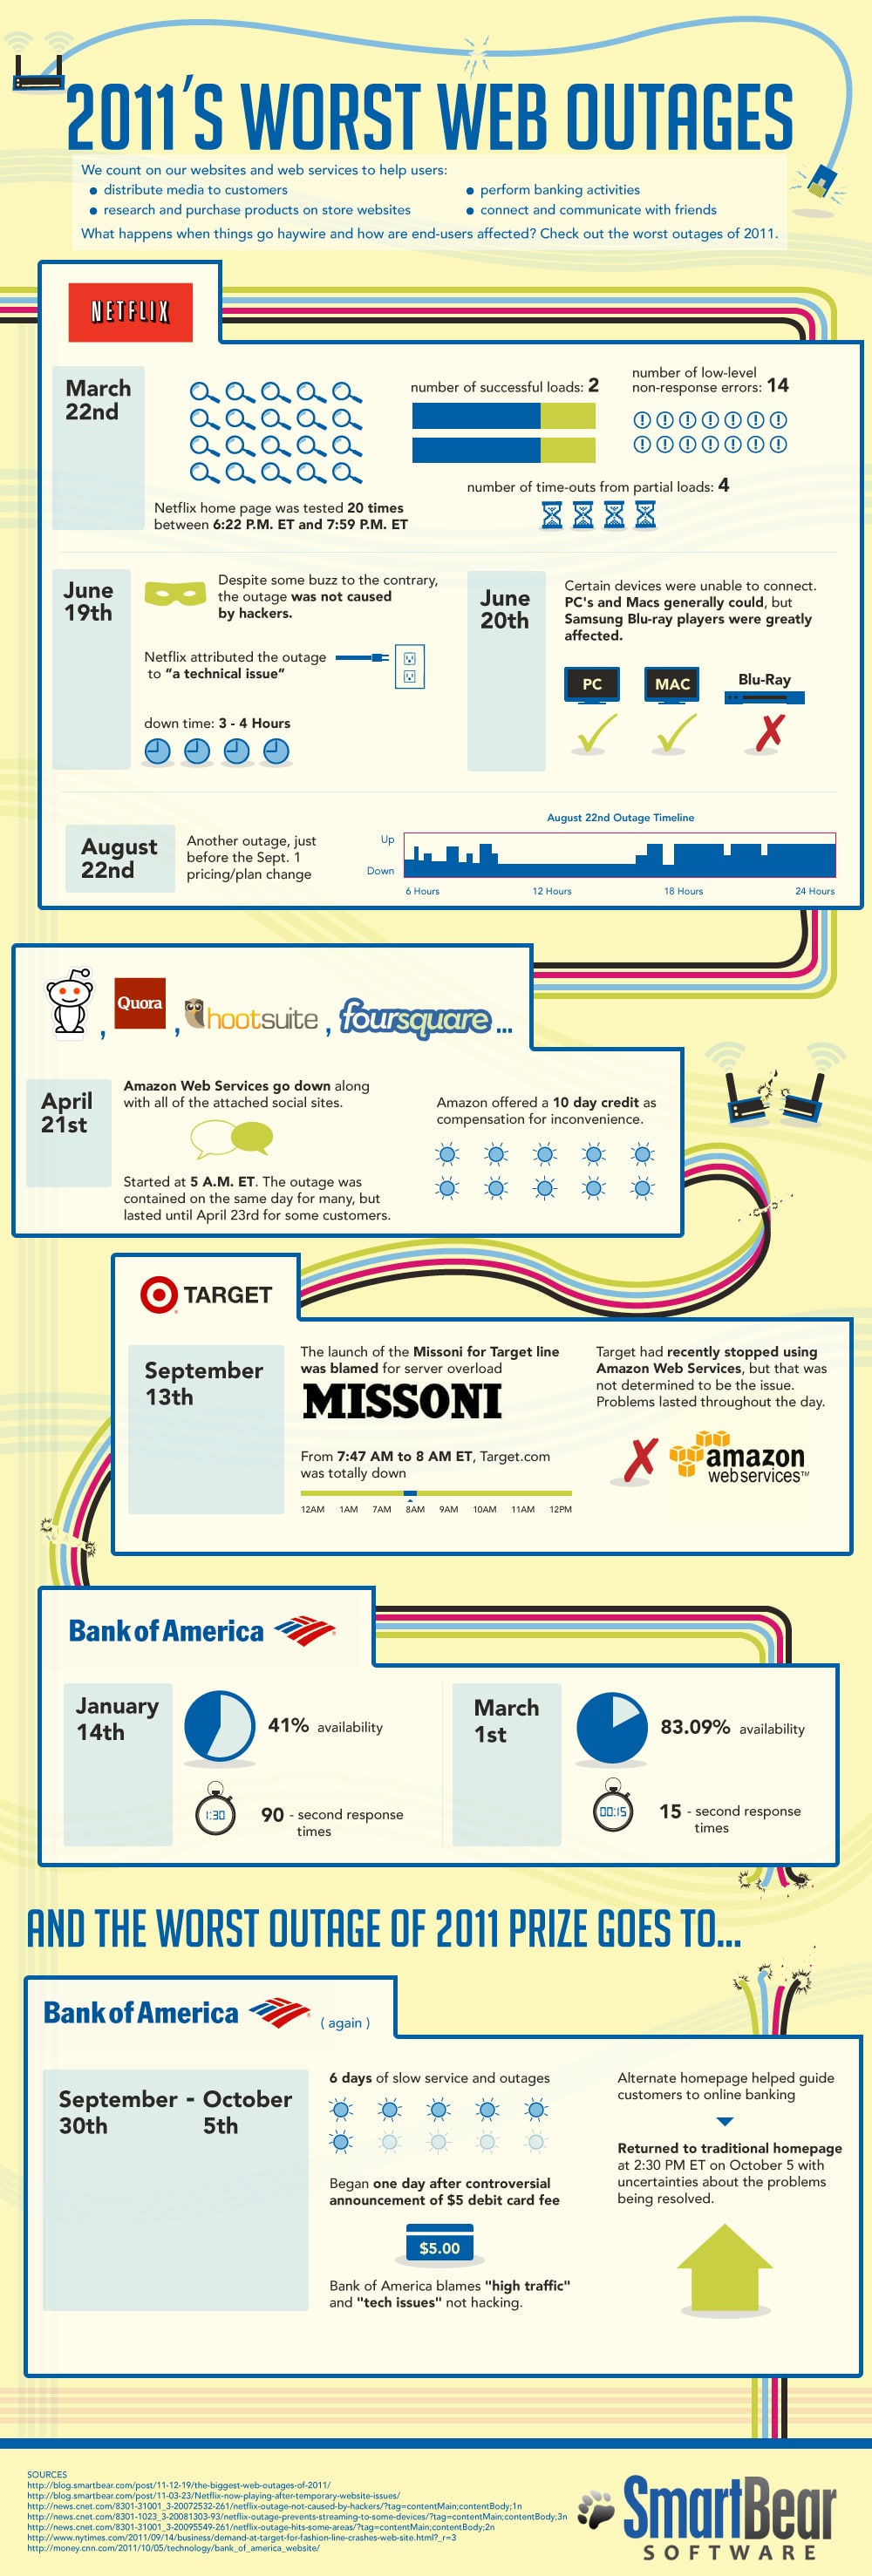 Worst Web Outages In 2011 [Infographic]